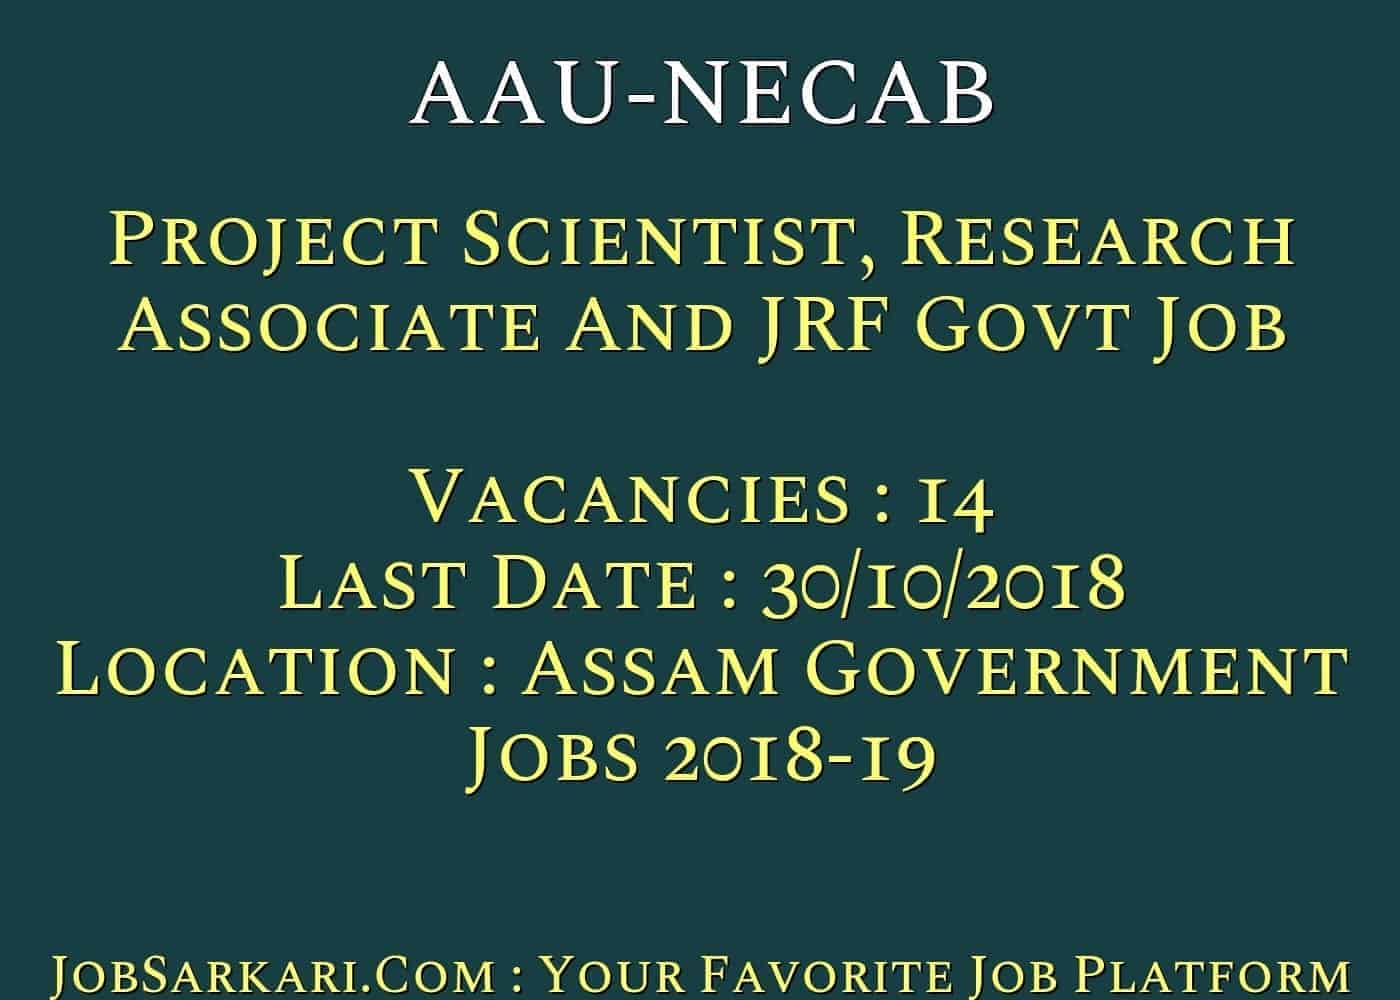 AAU-NECAB Recruitment 2018 For Project Scientist, Research Associate And JRF Govt Job